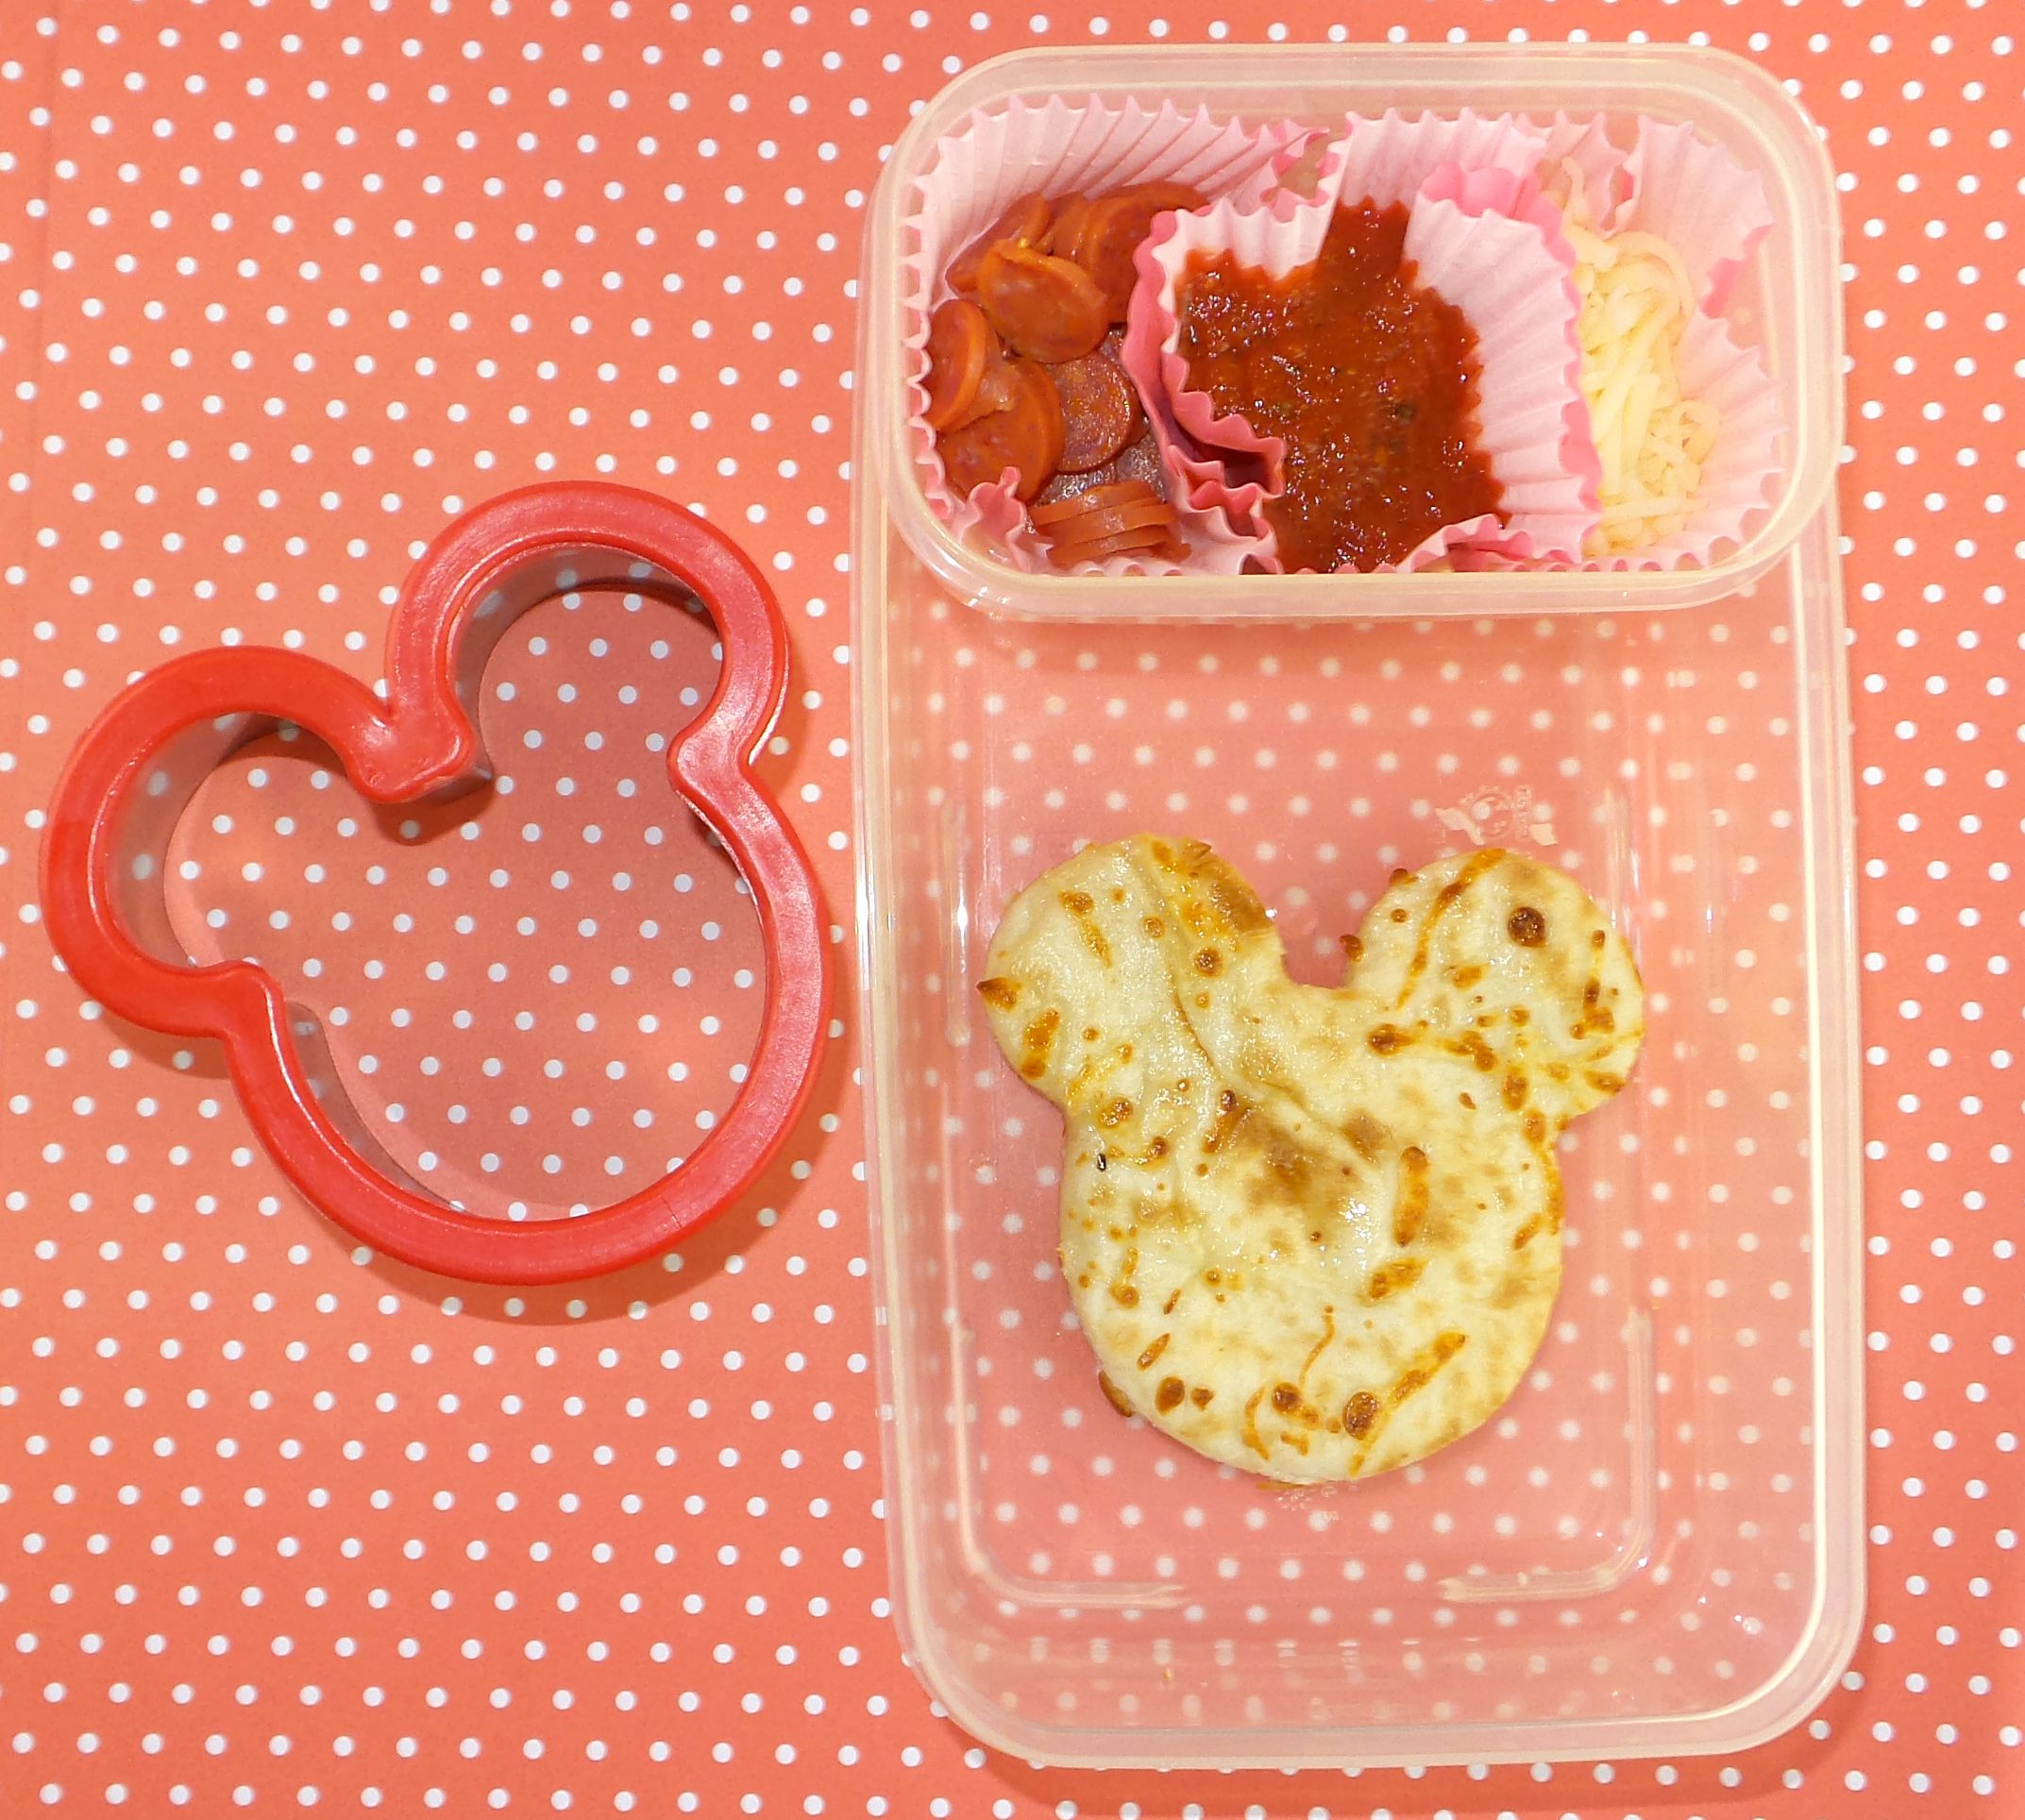 Finding Disney Bento Accessories Bunches O Lunches